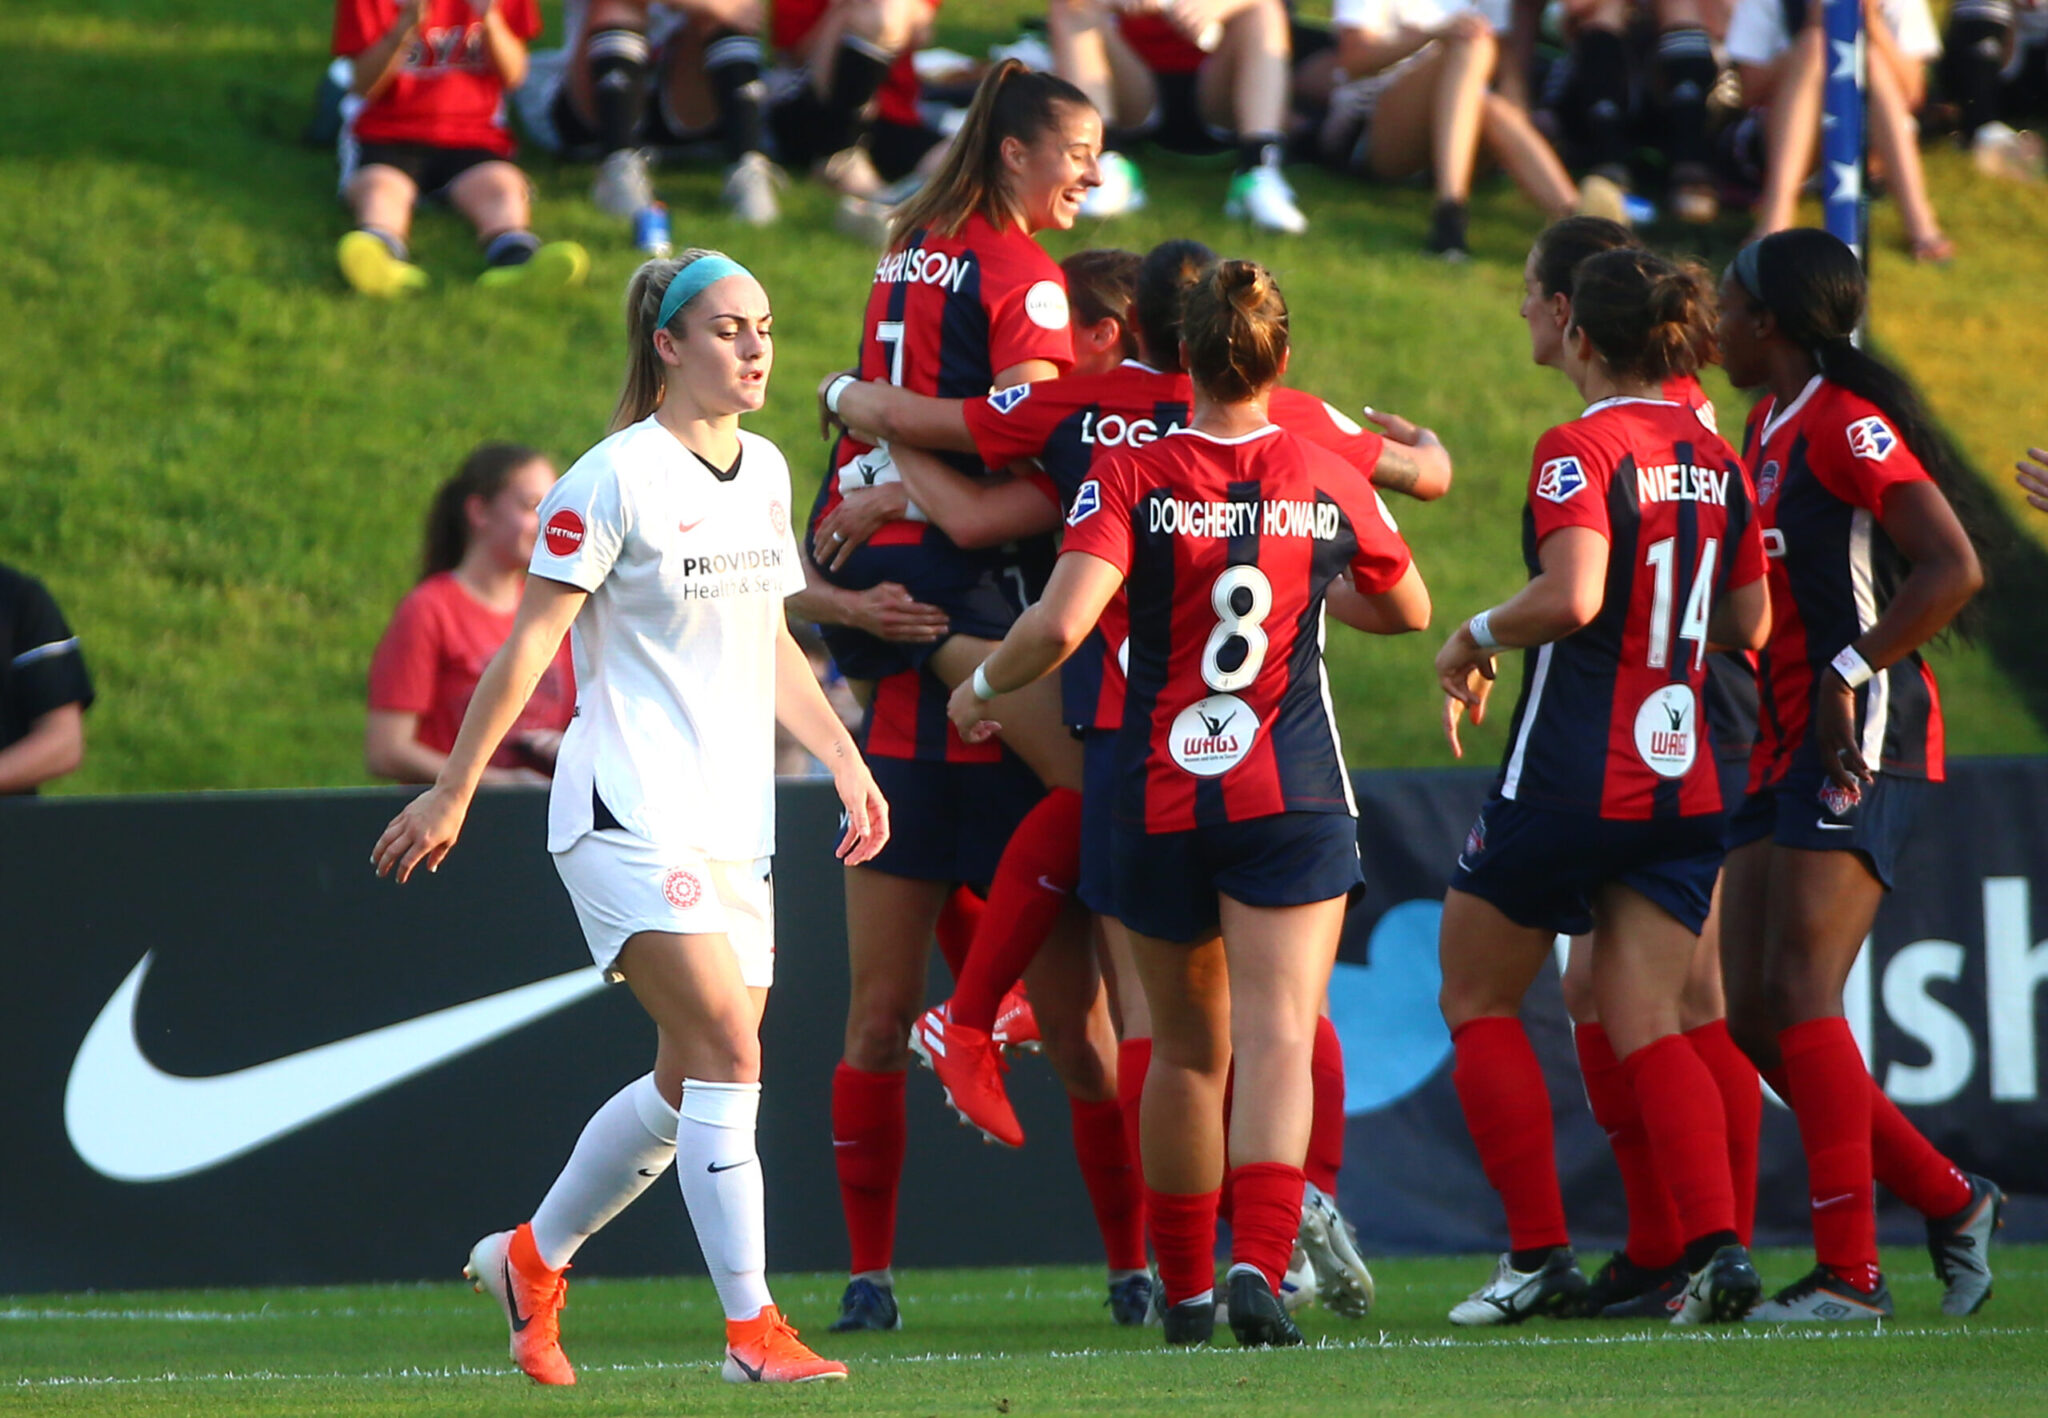 Spirit travel to west coast to face first-place Thorns Featured Image